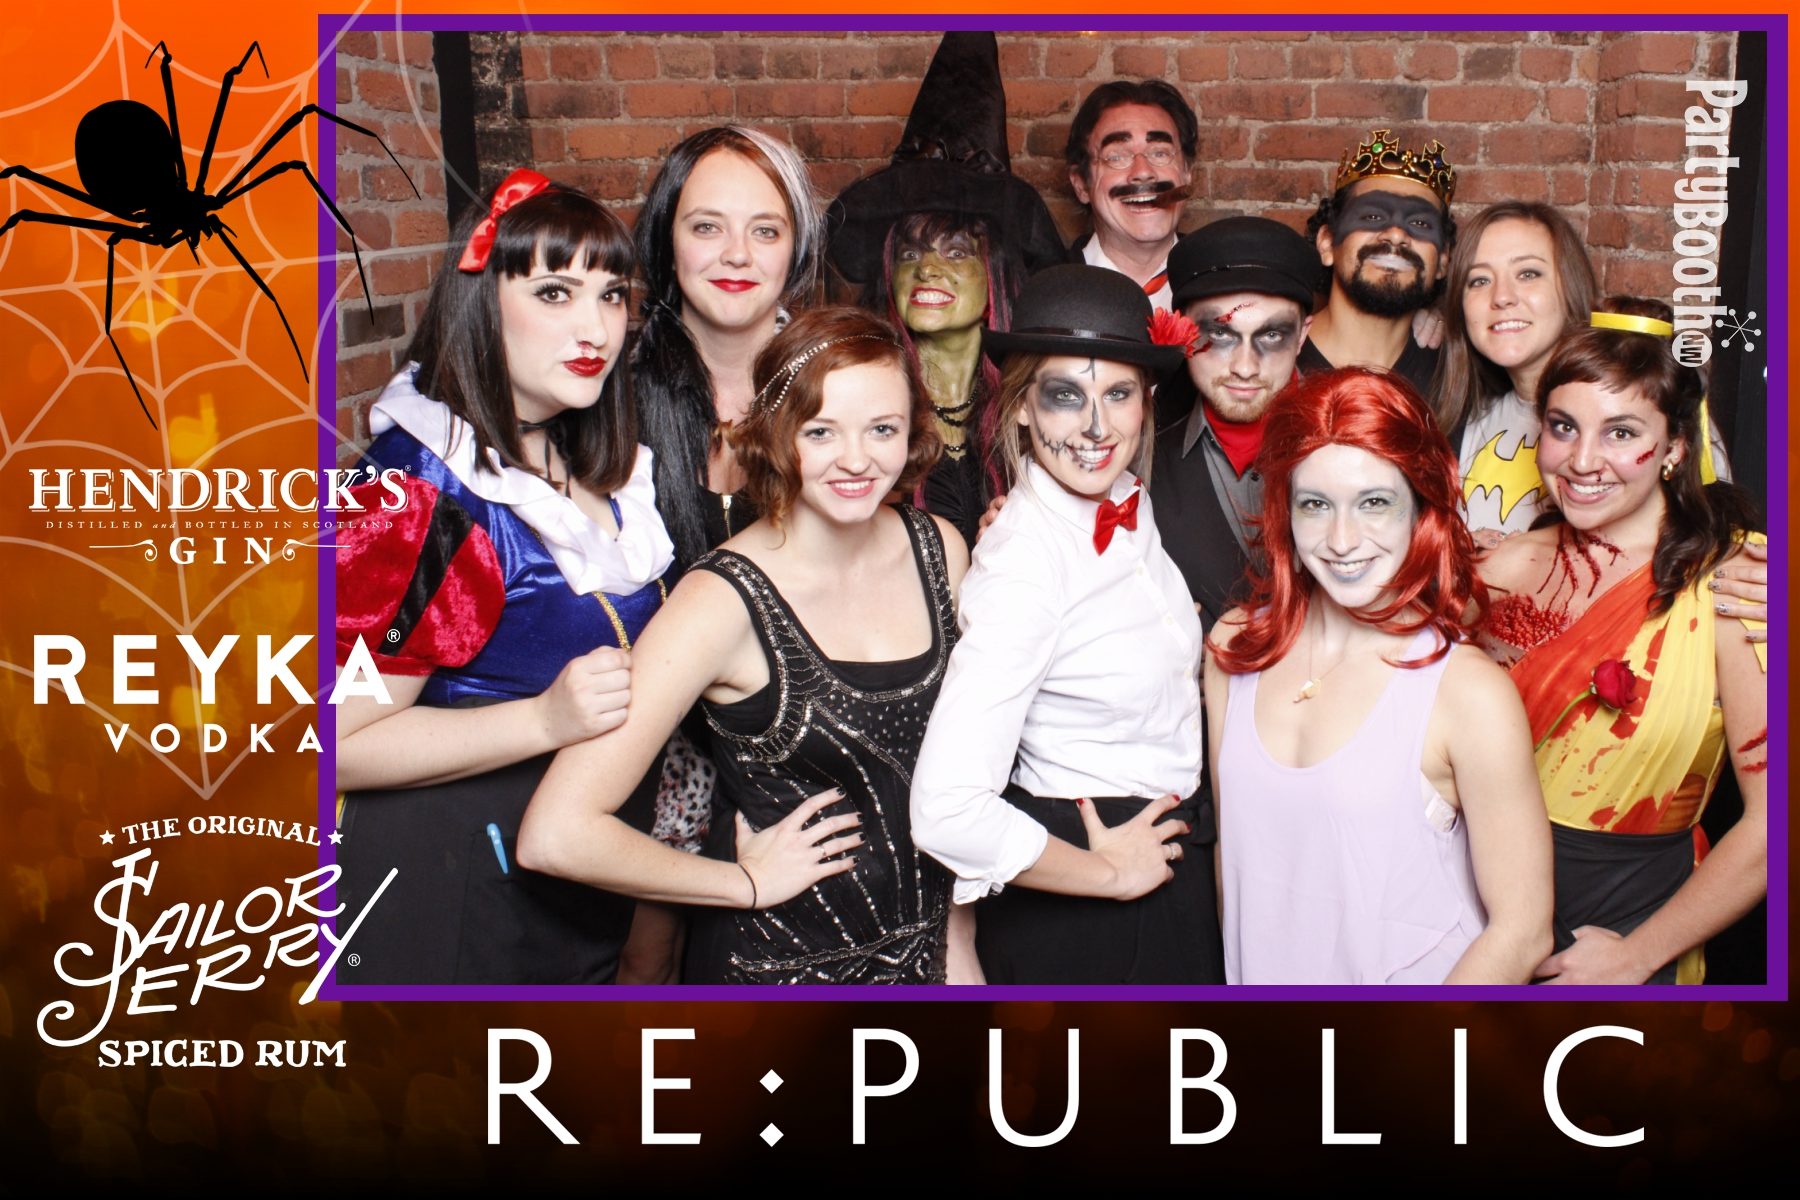 RE:PUBLIC was the place to be for Halloween 2015! With a DJ, costume contest and special Halloween cocktails from Hendrick's Gin, Reyka Vodka and Sailor Jerry, partiers in Seattle's South Lake Union neighborhood lived it up for a night they won't soon forget! Seattle Photo Booth © 2015 Ari Shapiro - PartyBoothNW.com